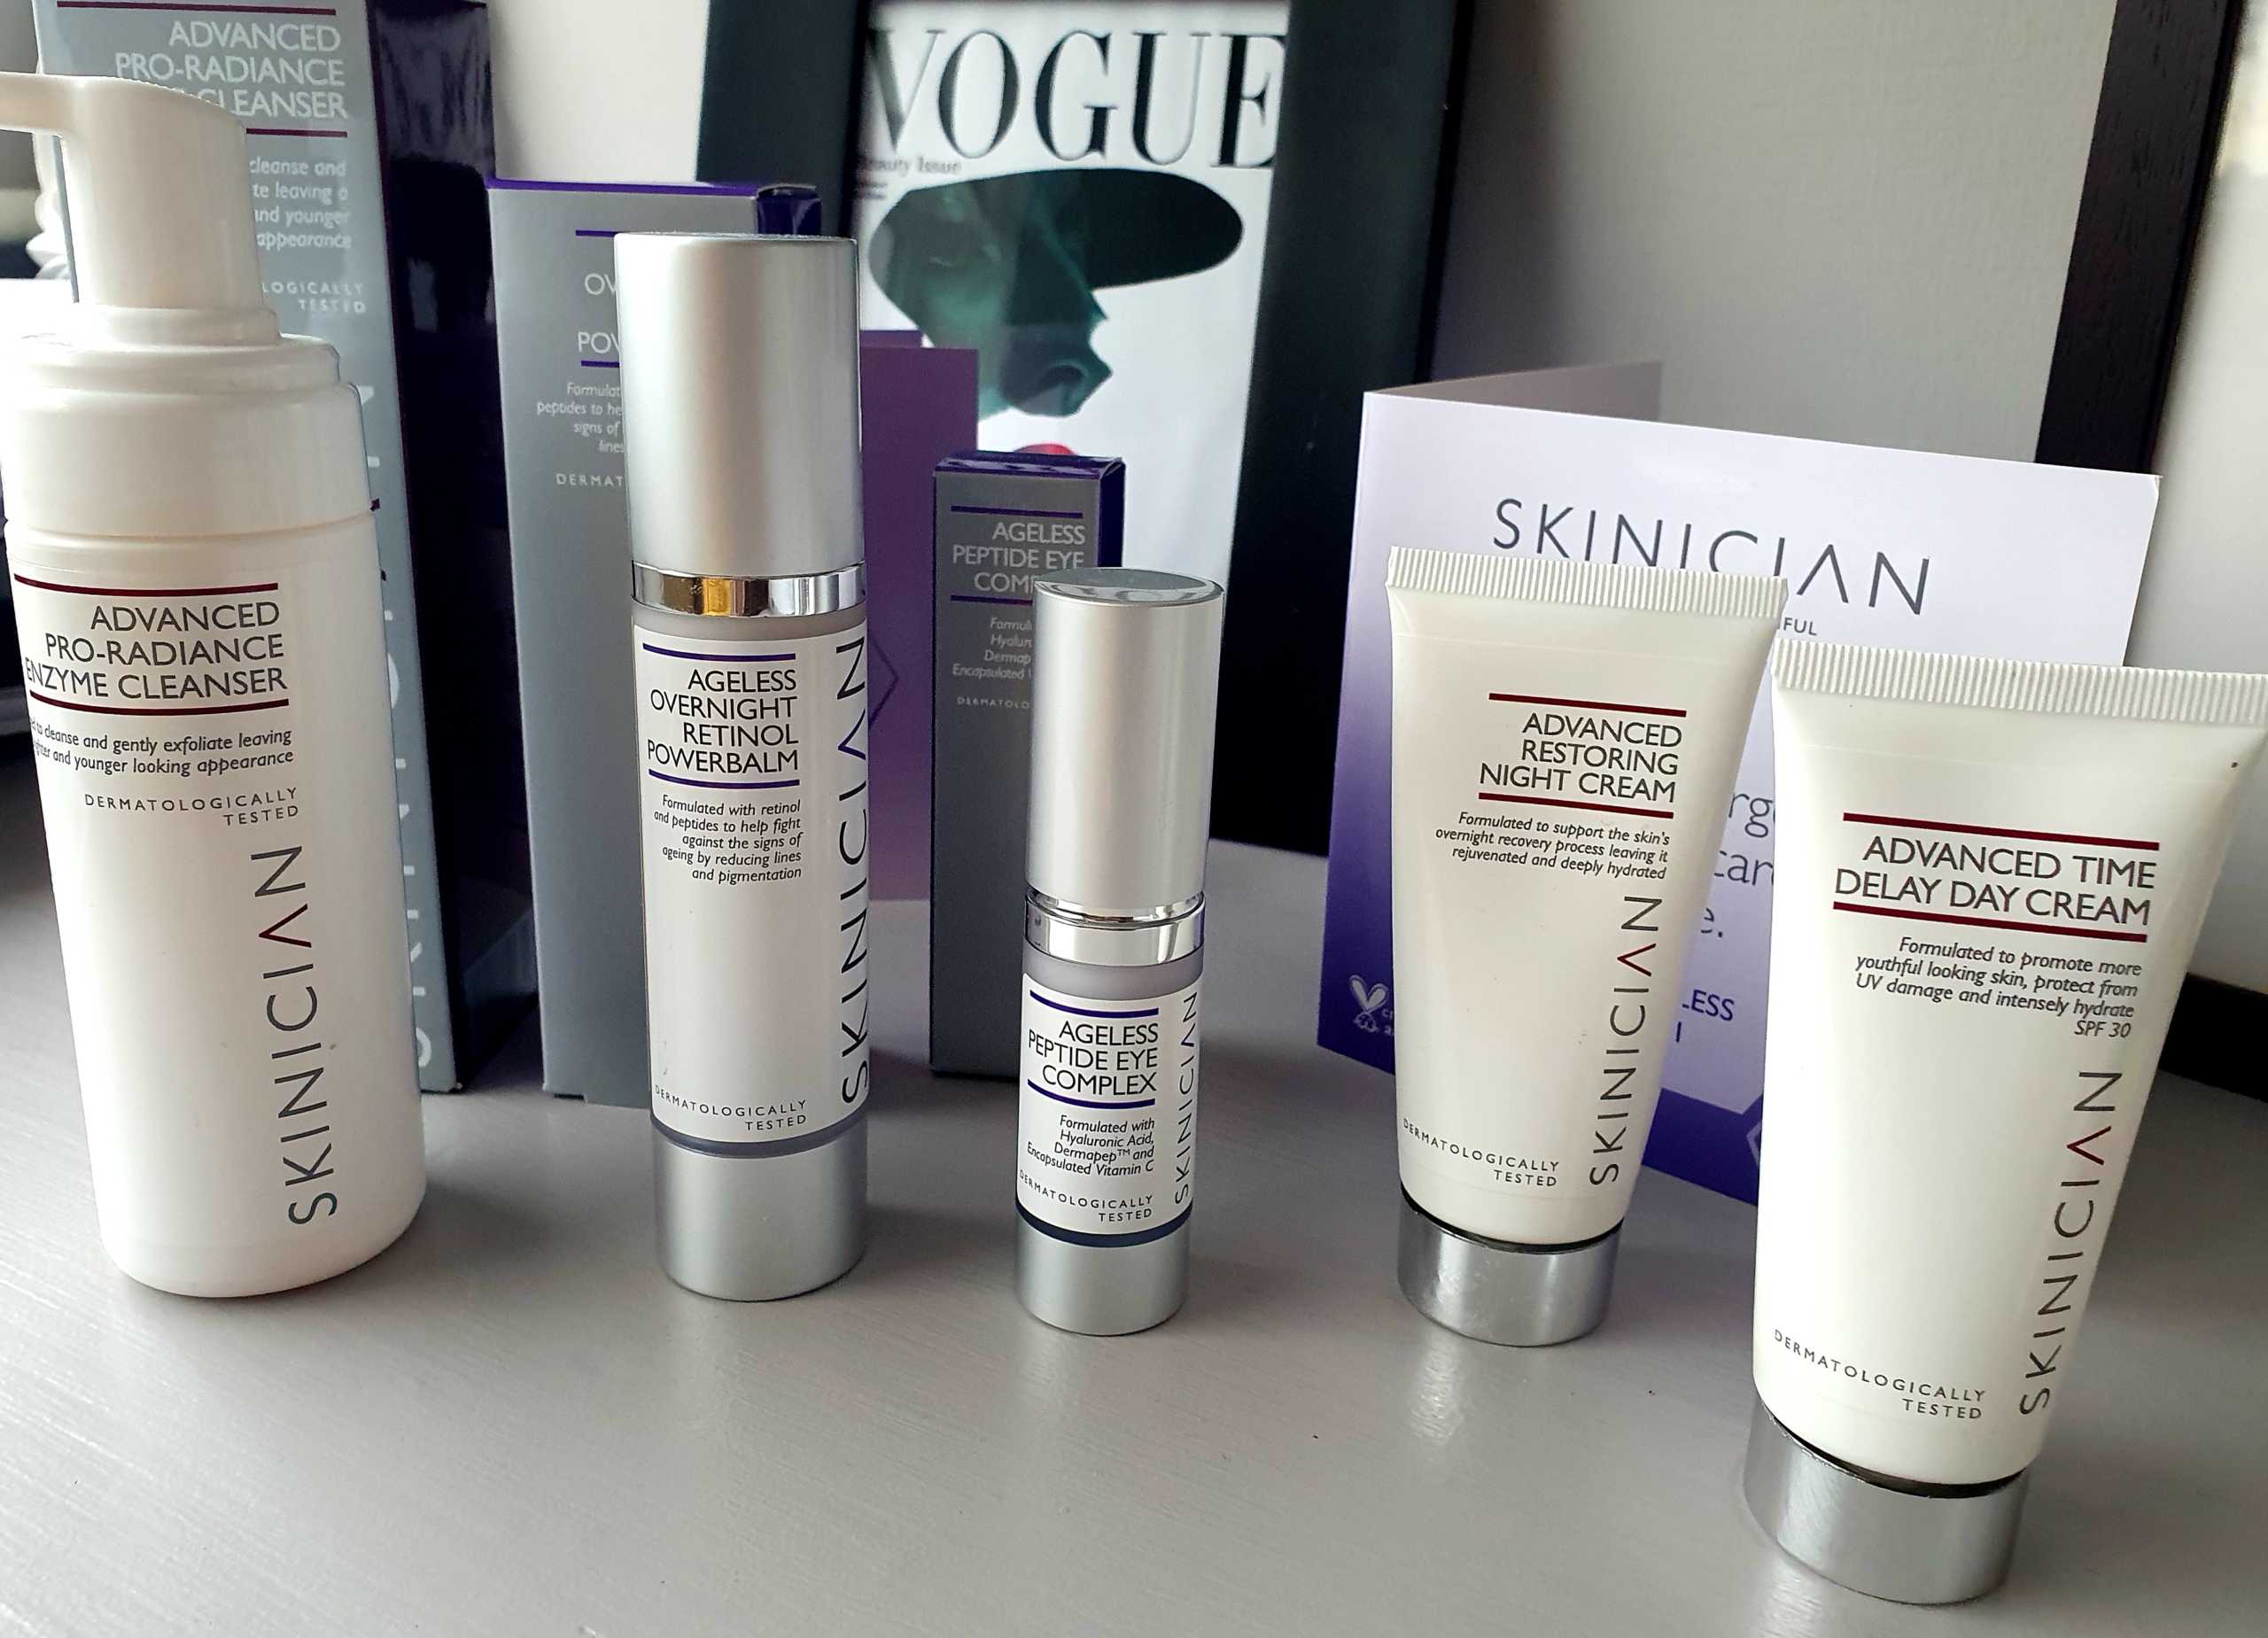 Skinician Skin Products